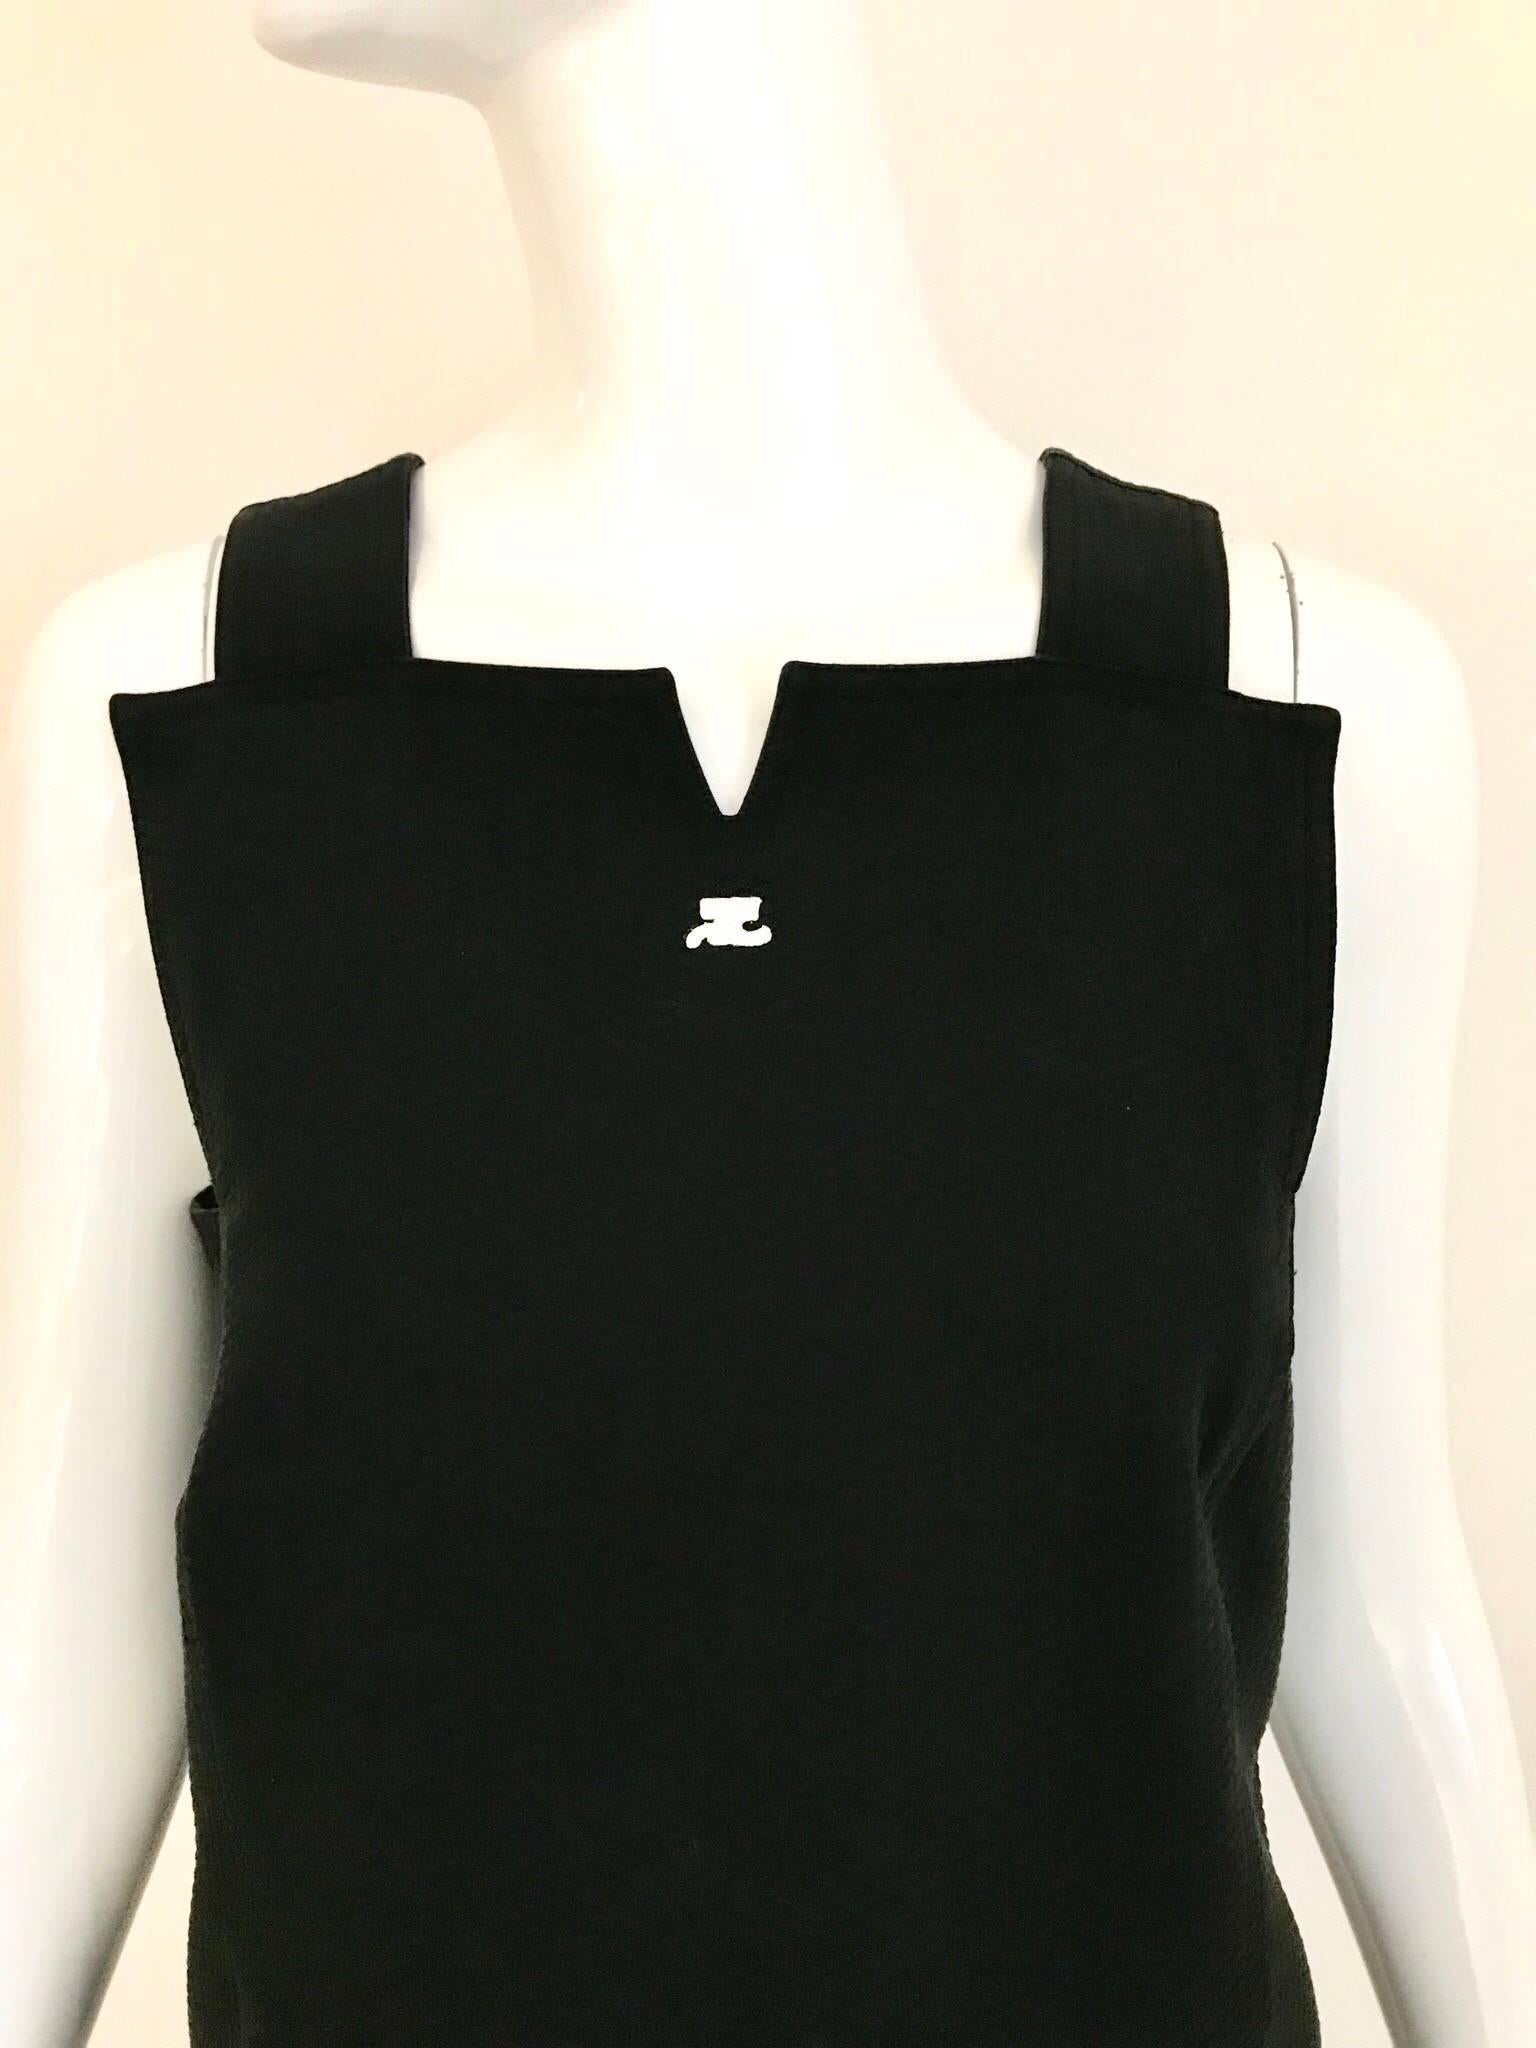 Simple 90s Black Cotton Pique Courrege pinafore sleeveless dress. Dress has buttons at the back. Fit size: 6/ Medium
Bust: 34 inches/ WAsit 32 inches/ Hip 39 inches/ Dress length: 36 inches